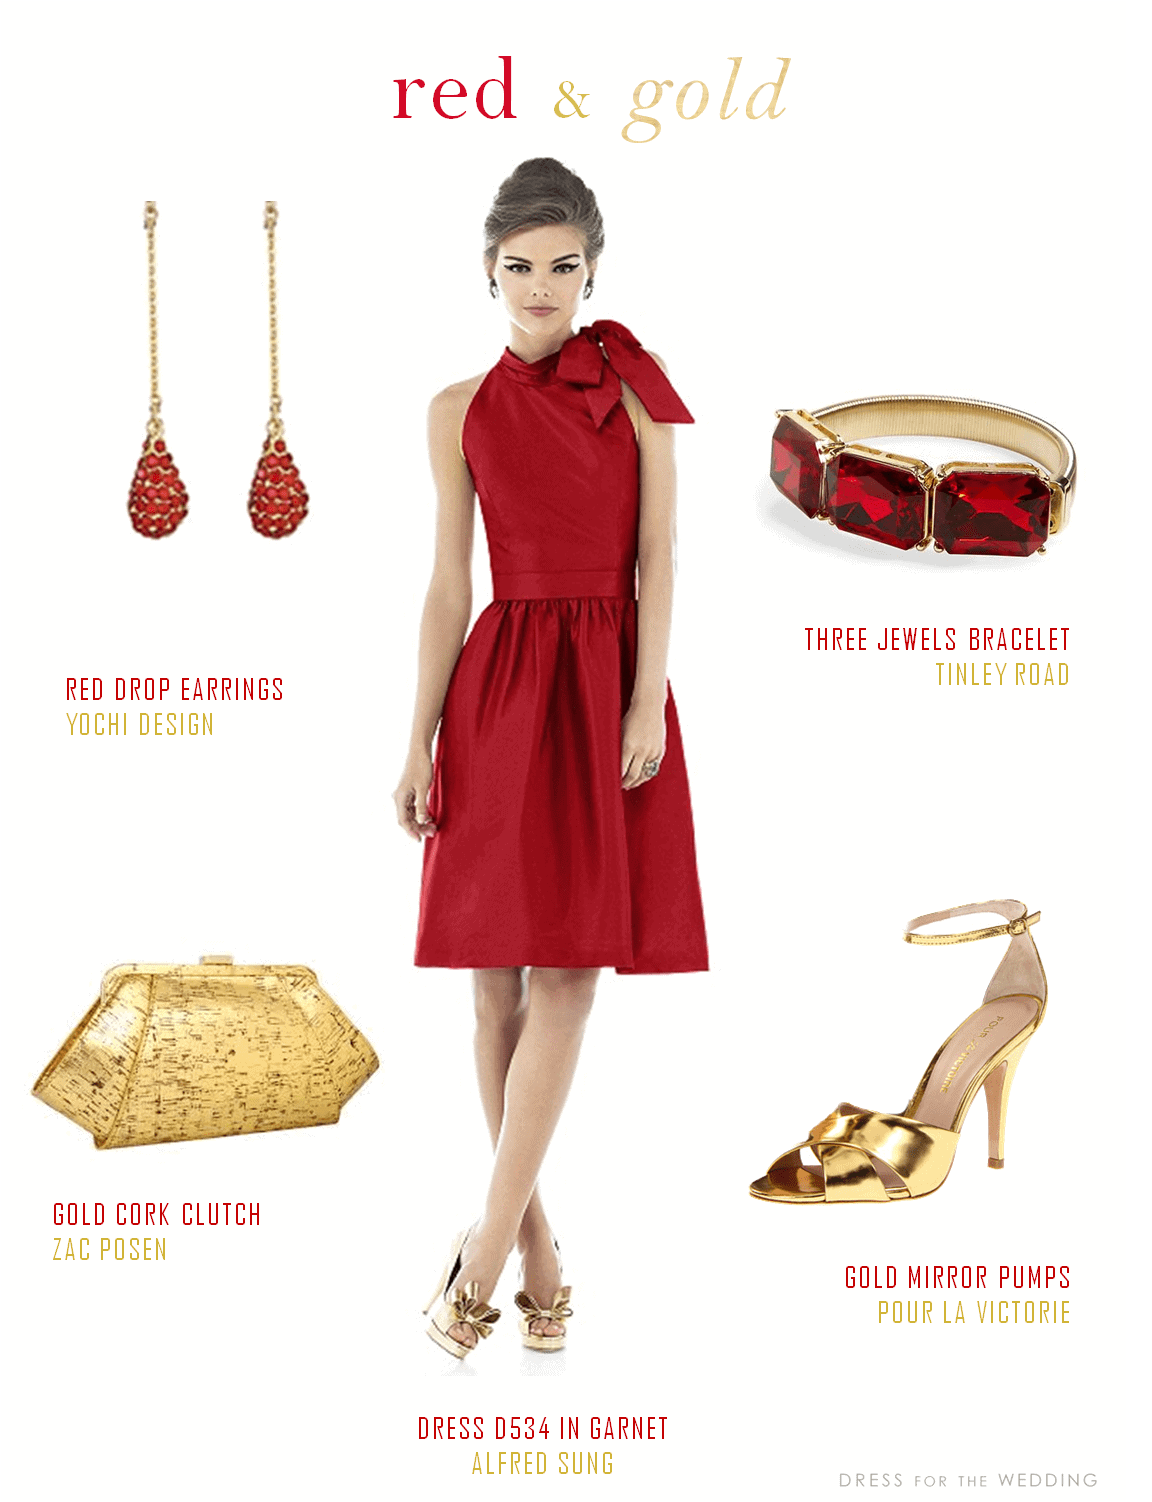 Red Dress with Accessories | Virtual fashion, Red dress, Dress